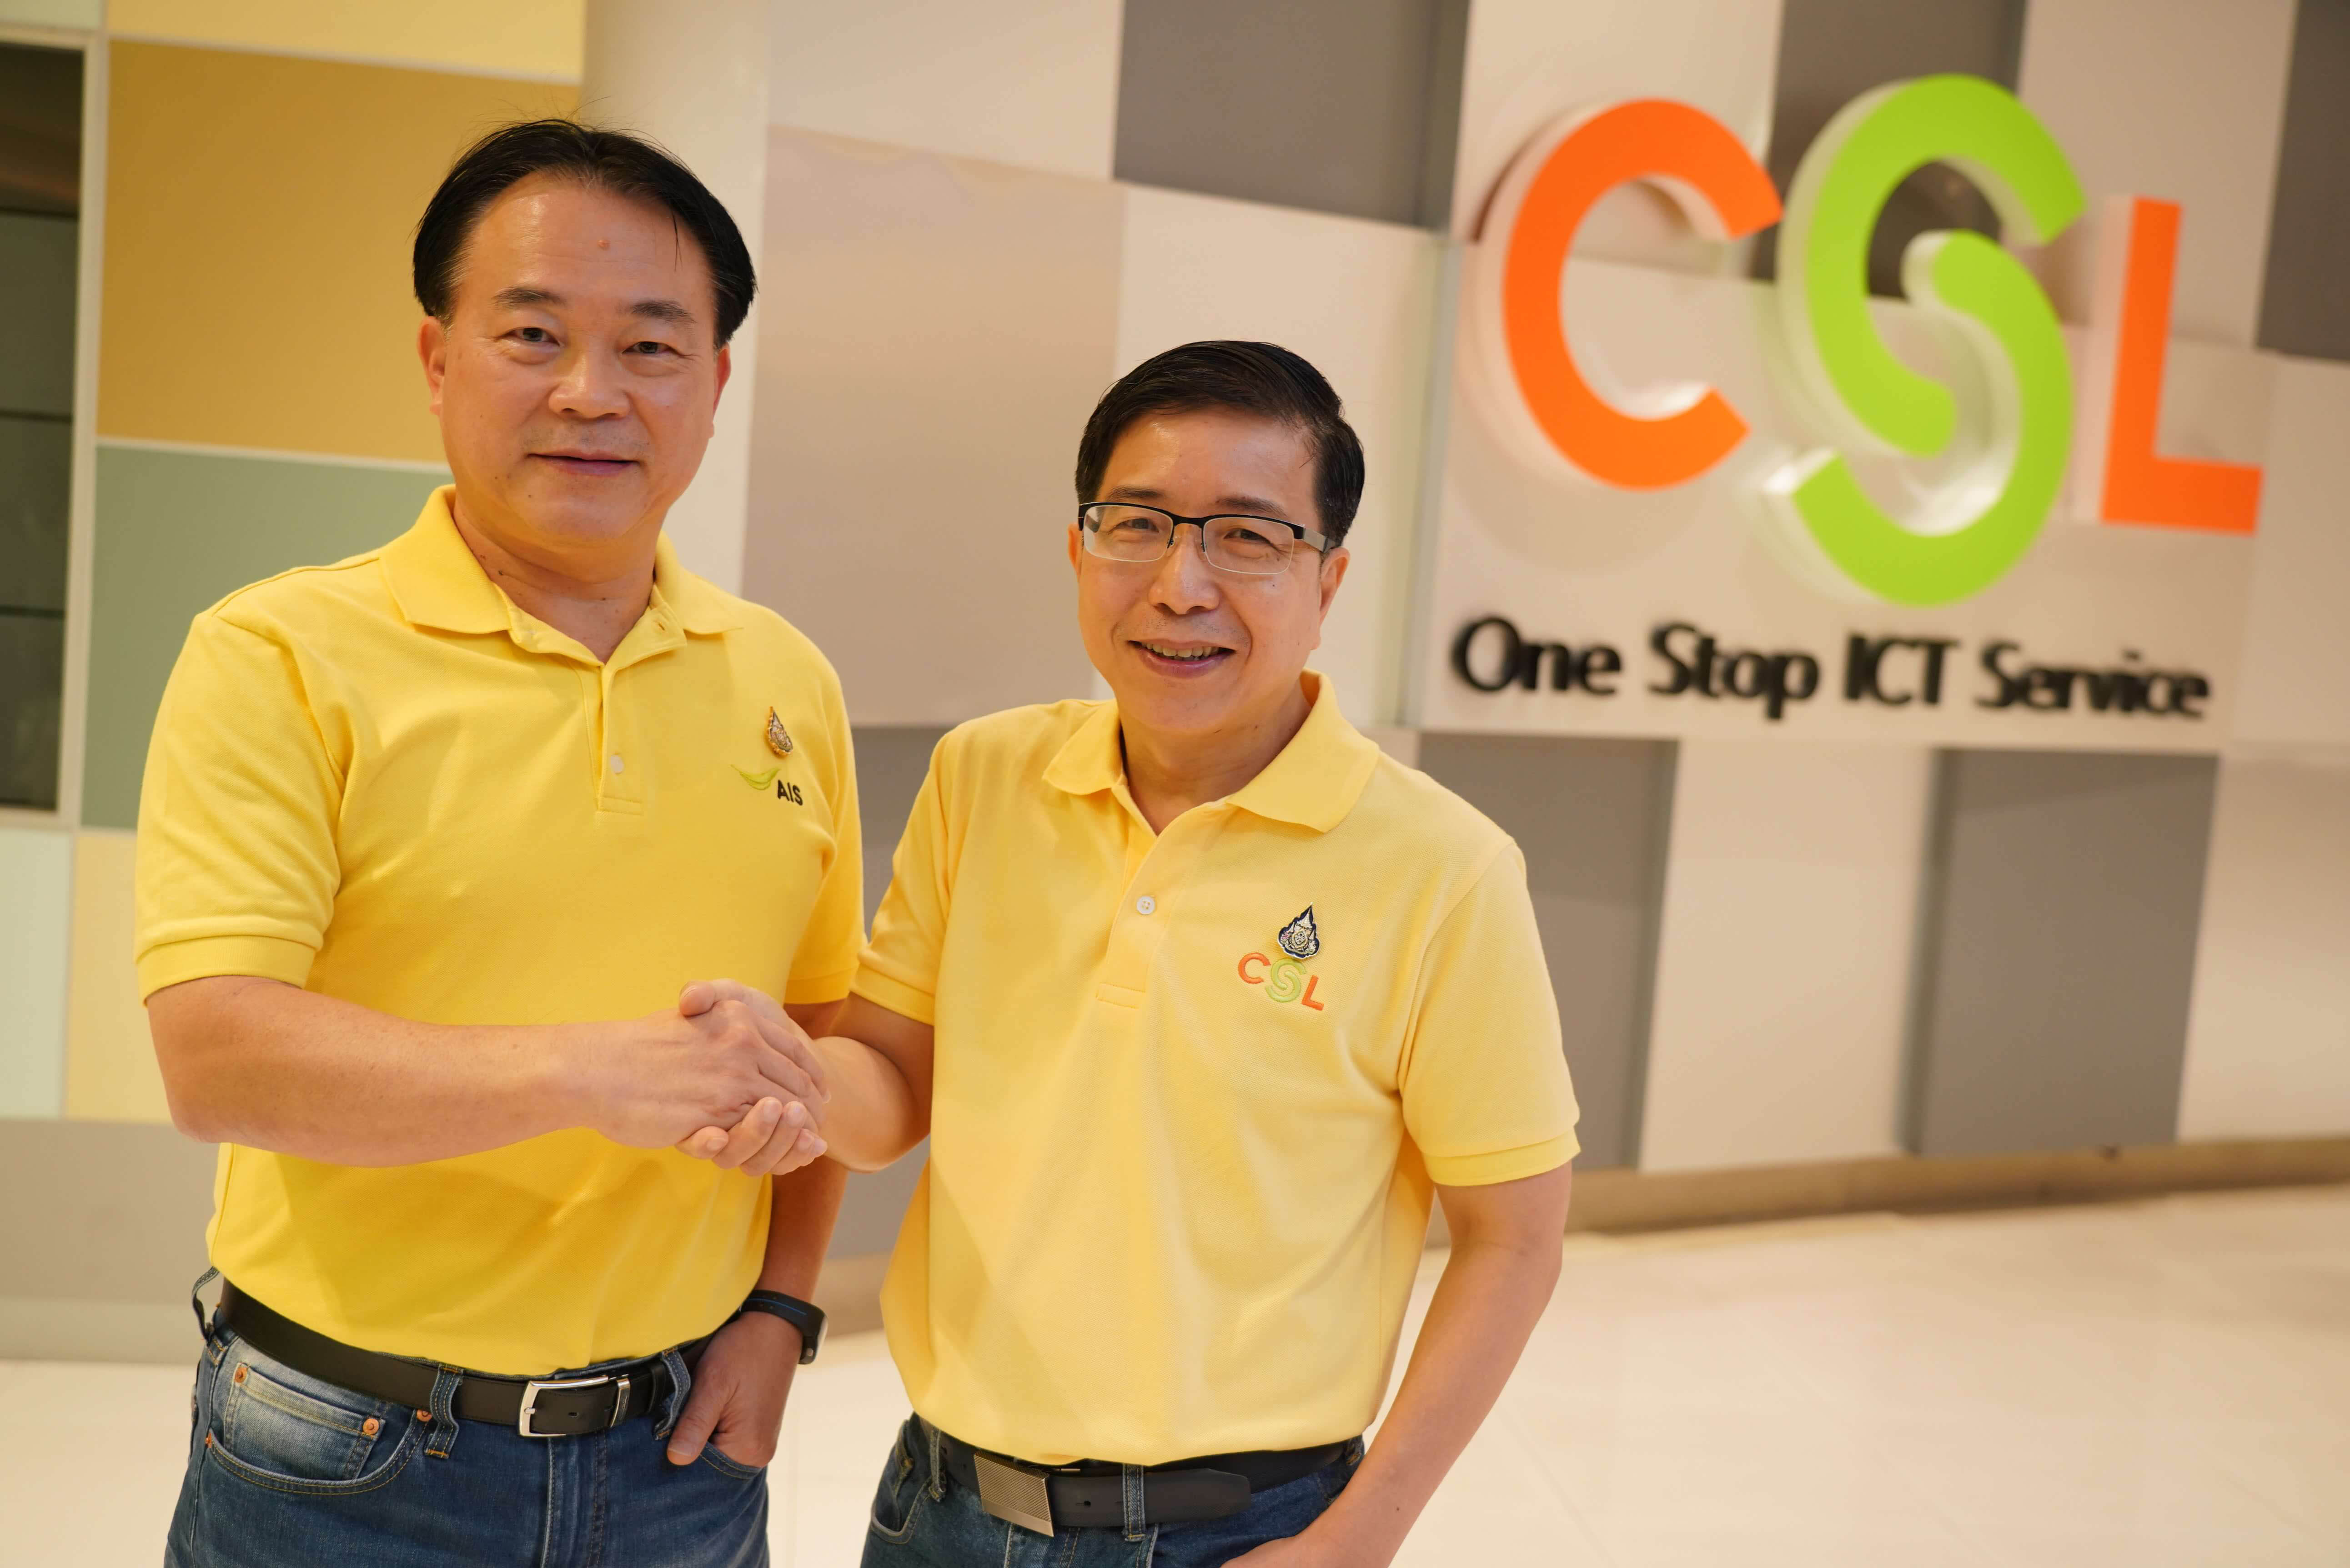 CS LOXINFO rebranding to CSL, a big move with 3Ss strategy